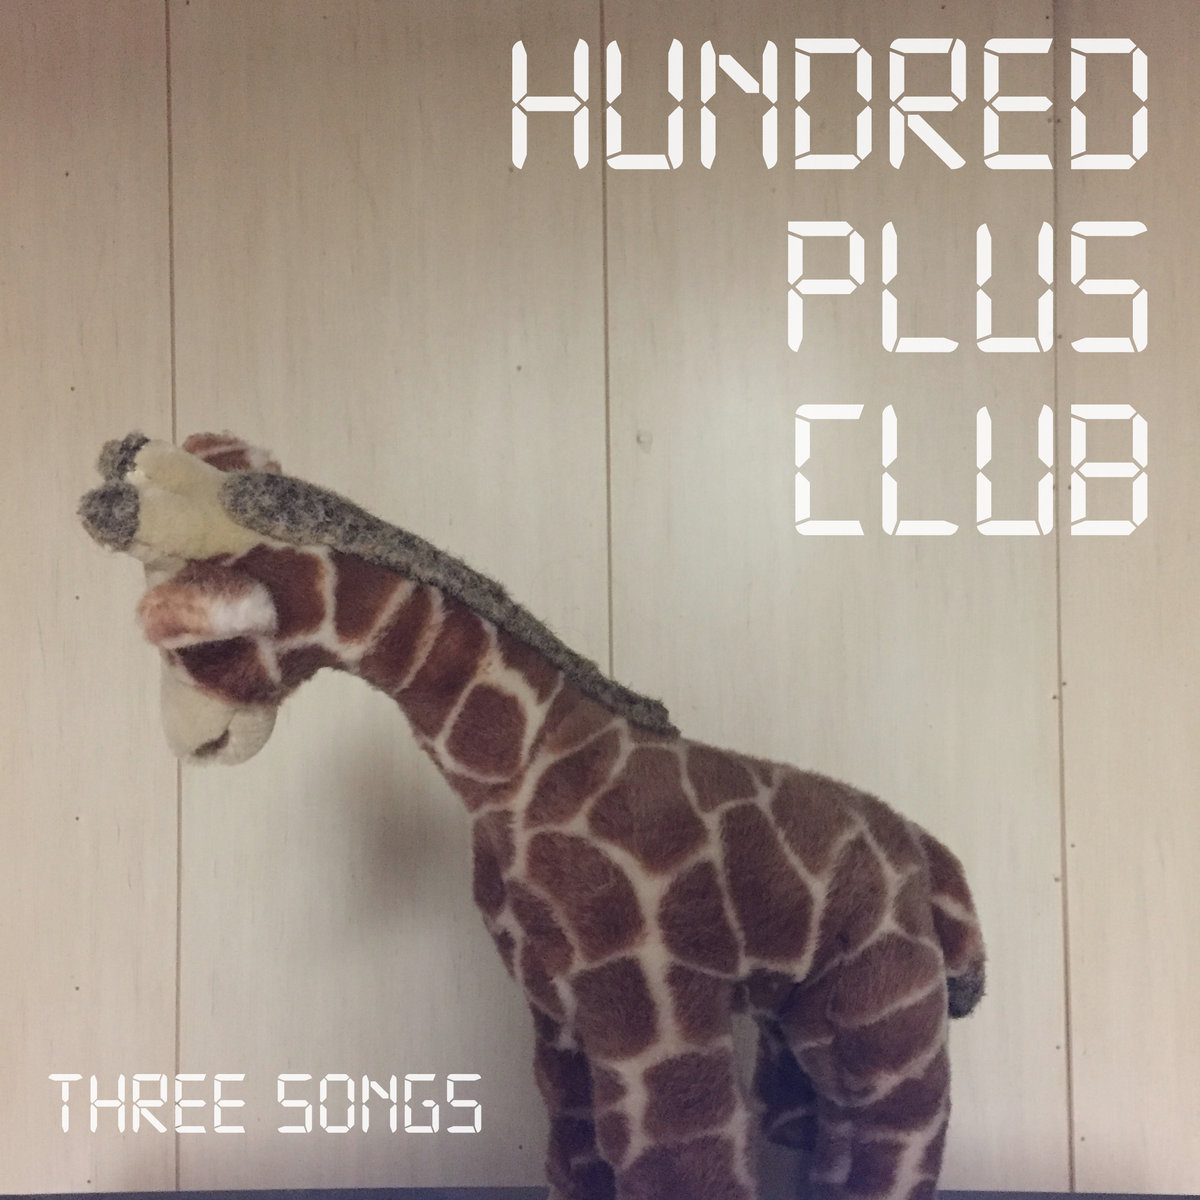 Hundred Plus Club Releases Debut EP